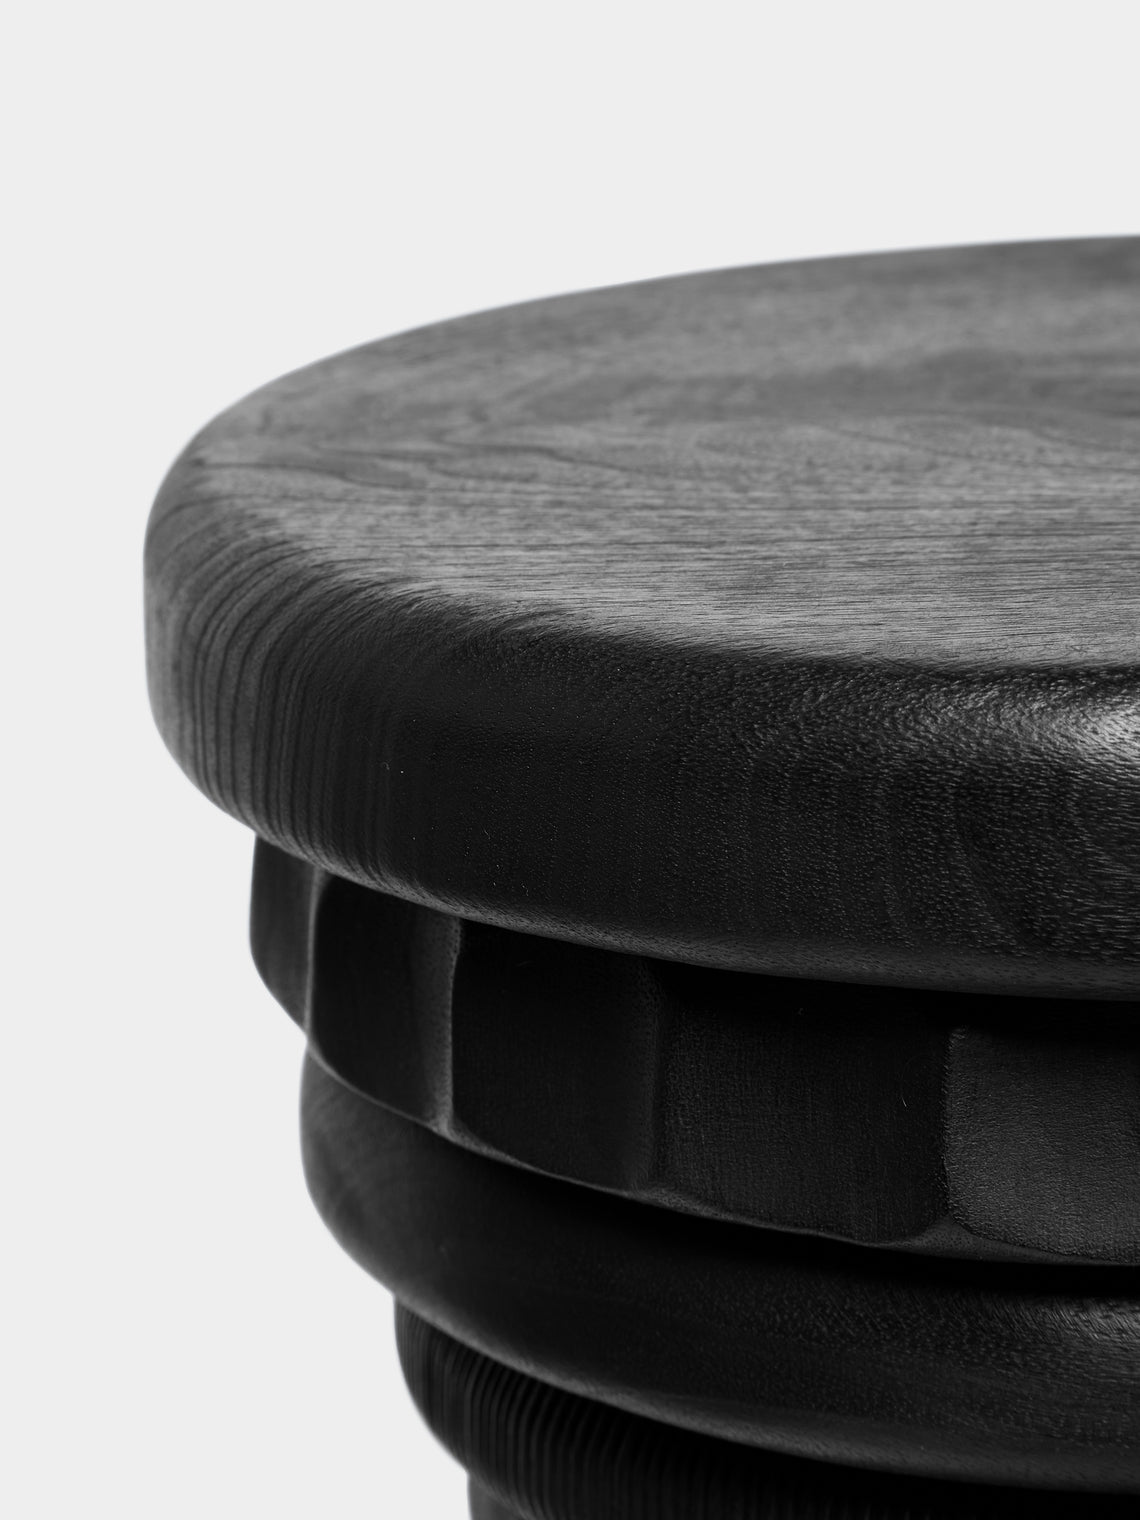 Lucas Castex - Hand-Engraved Wood Stool -  - ABASK